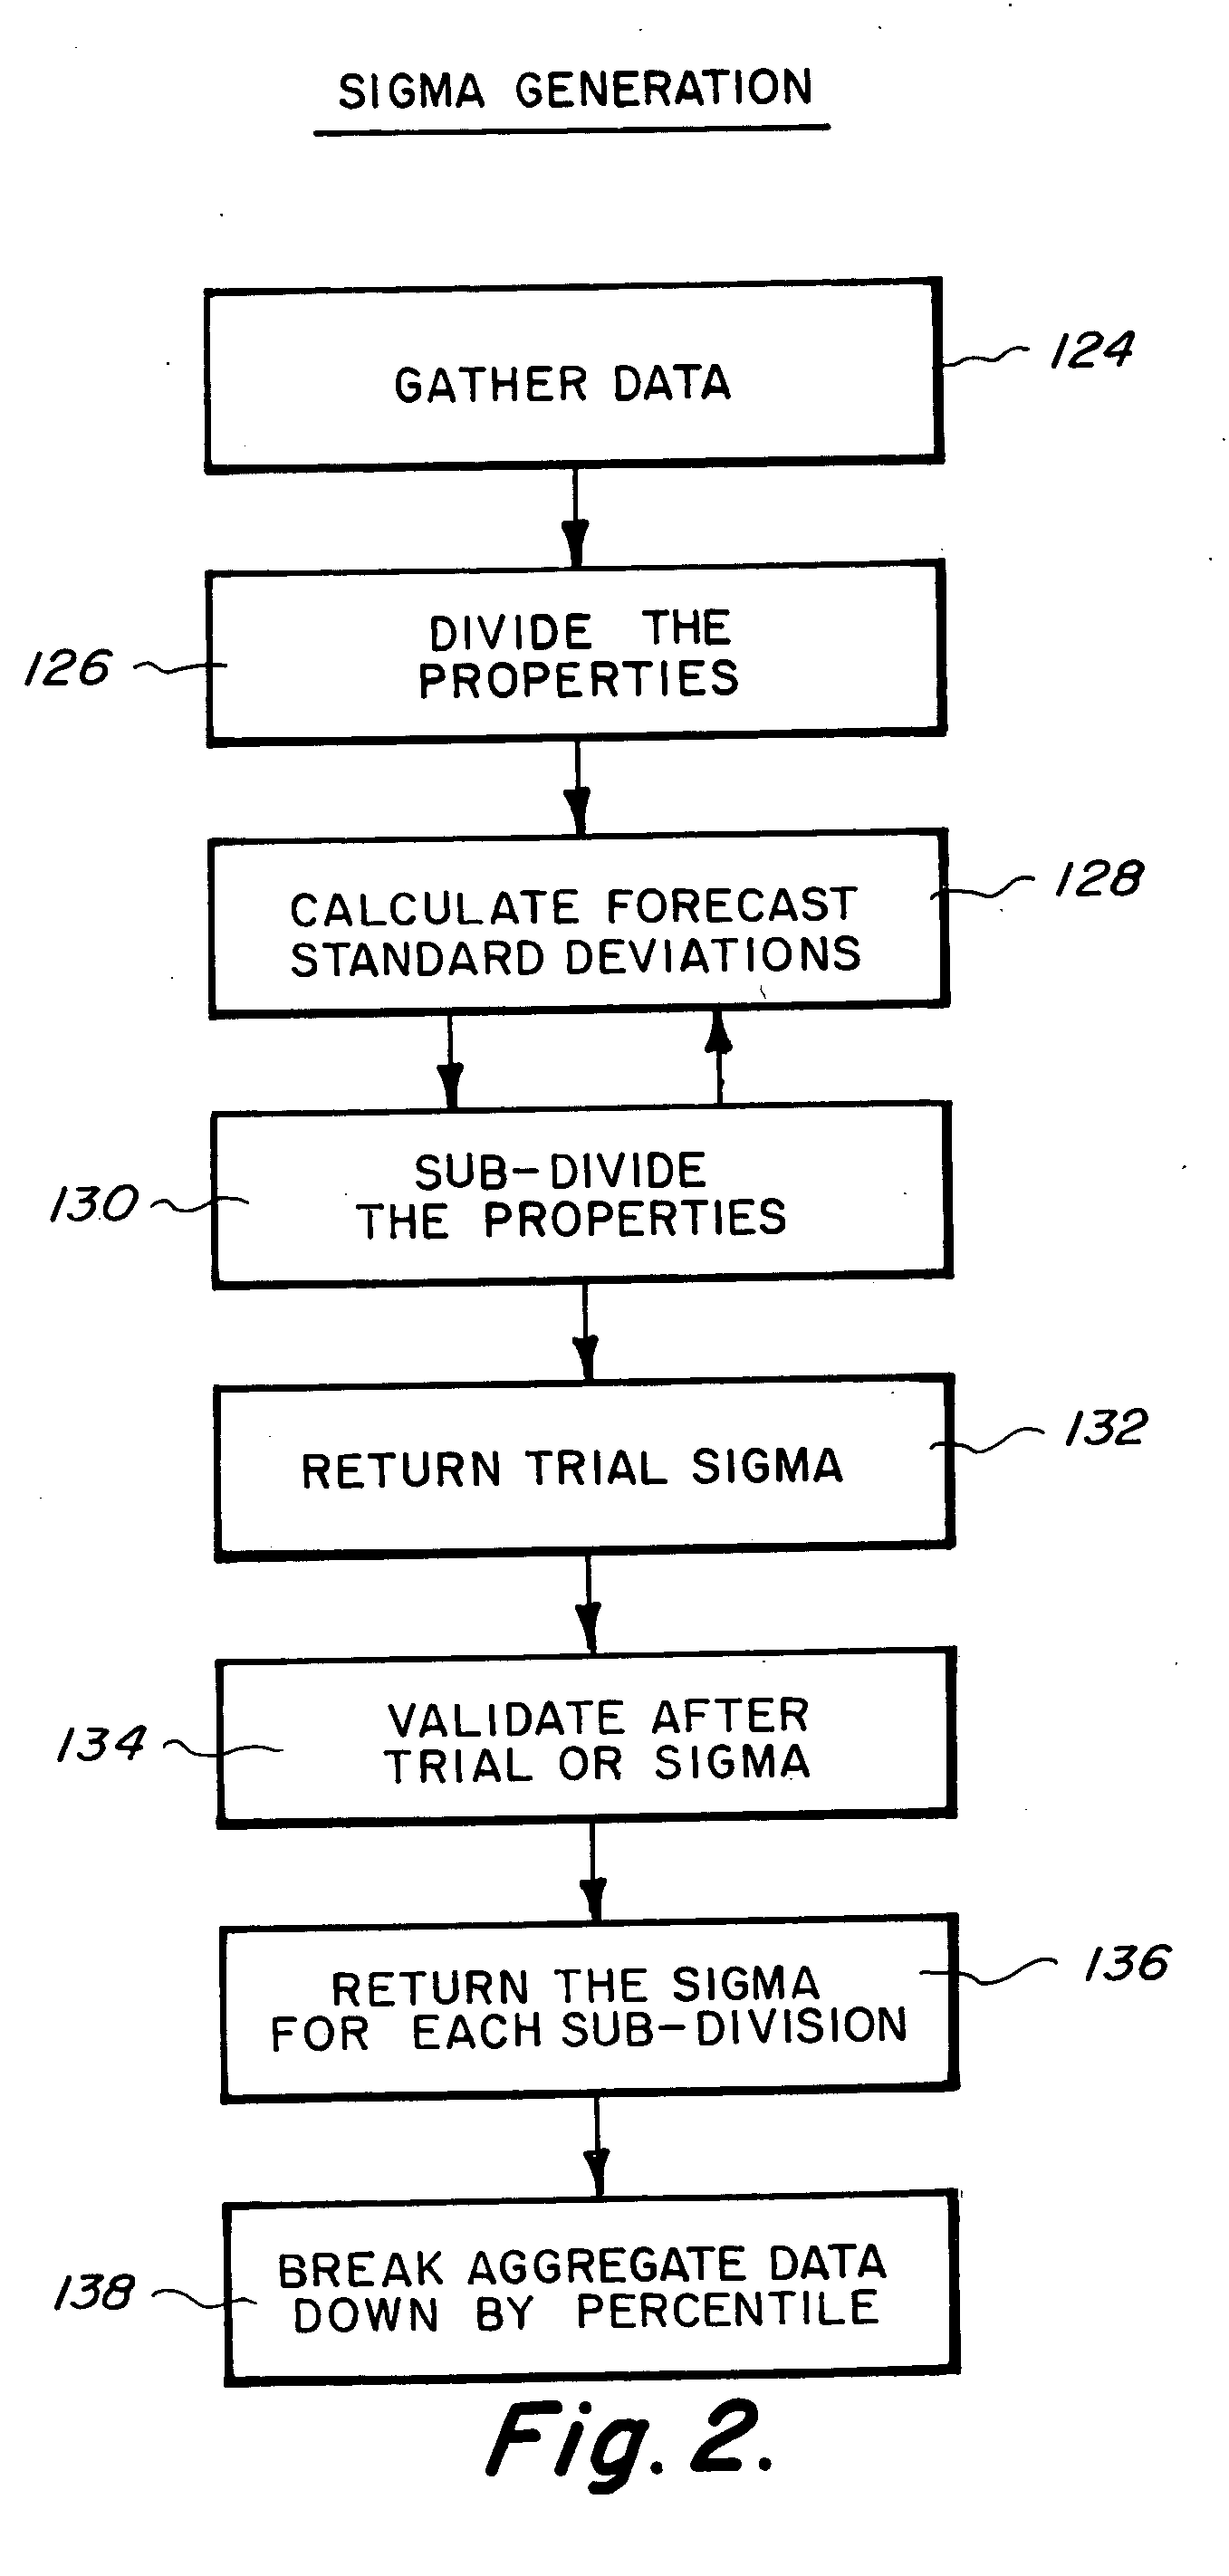 Method and apparatus for constructing a forecast standard deviation for automated valuation modeling